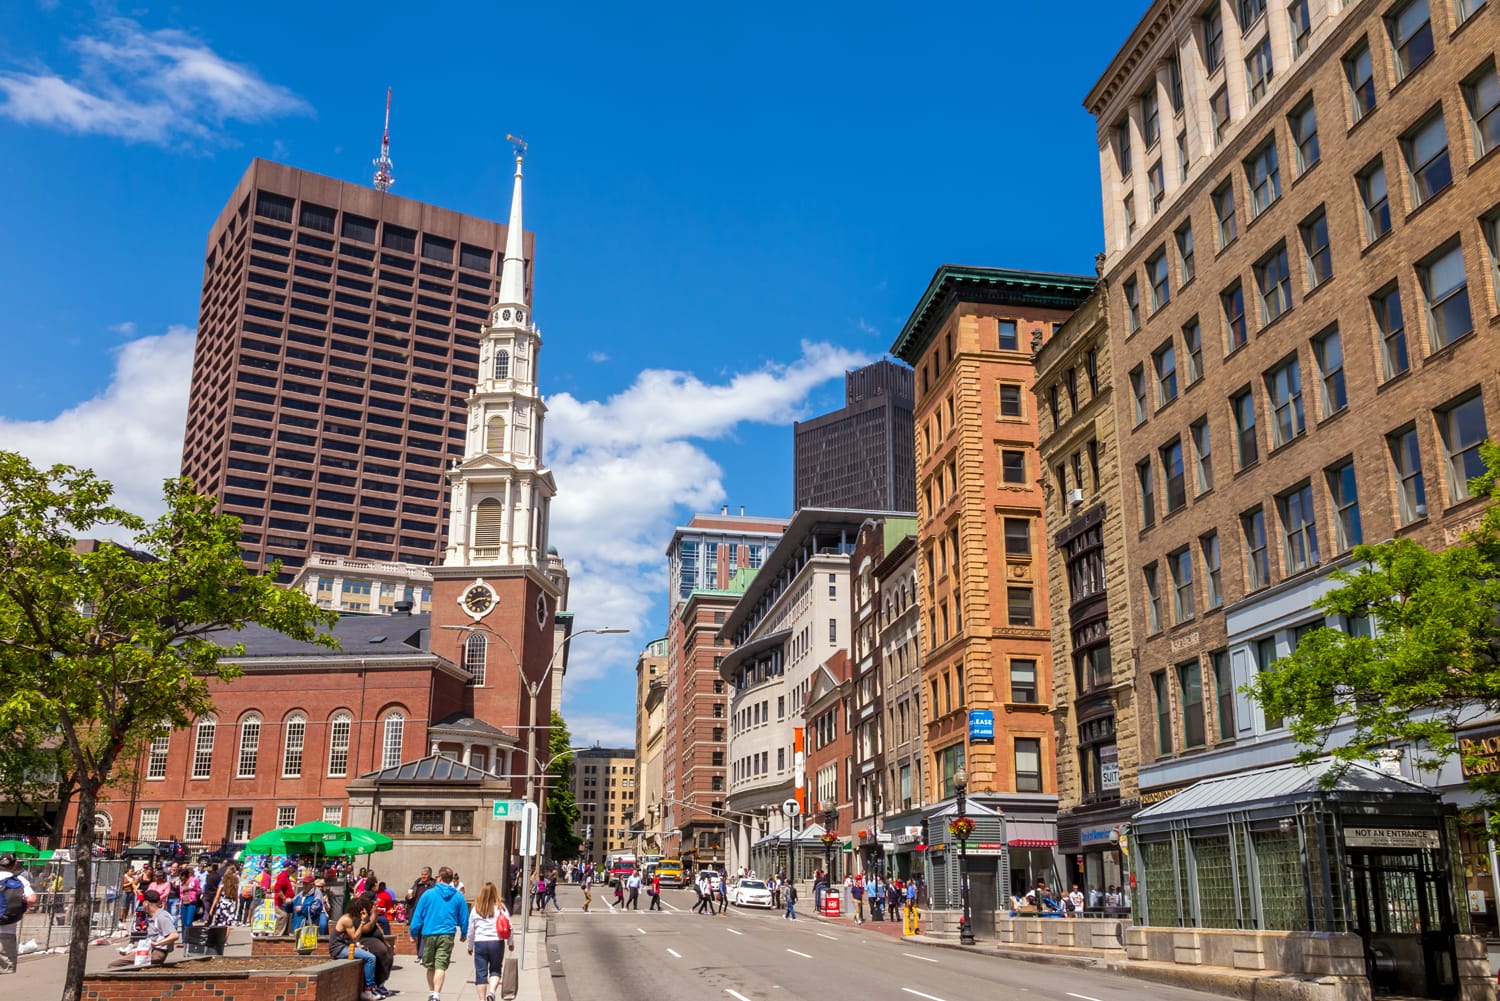 Boston's Freedom trail with the Park Street Church in the background on May 30, 2014. The Freedom Trail is a 2.5-mile-long red (mostly brick) path through downtown Boston.